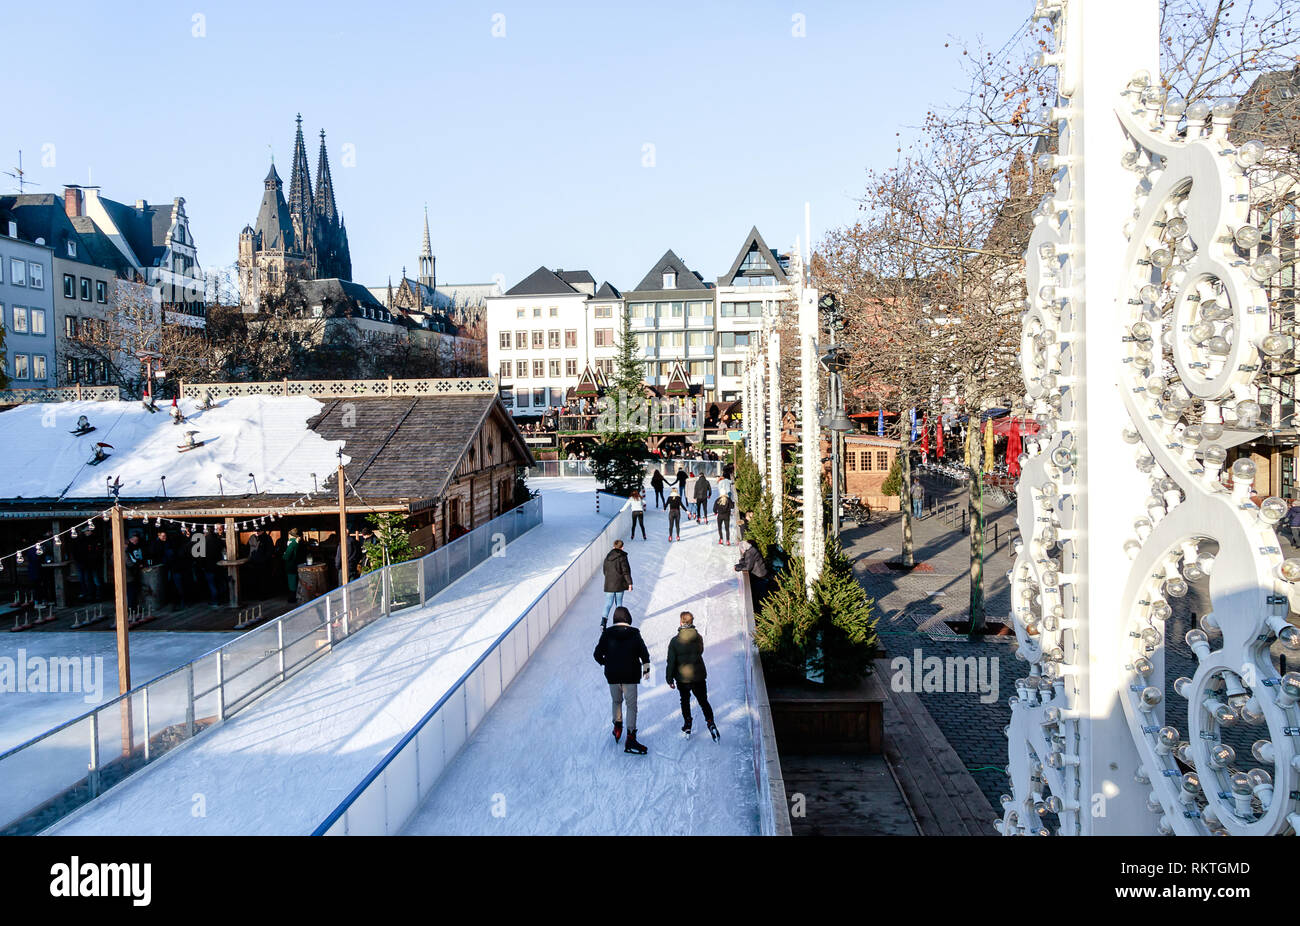 Cologne, Germany - wintertime in the Old Town. In this fairy-tale atmosphere, a unique skating rink fits into the Heumarkt (Hay Market). Stock Photo